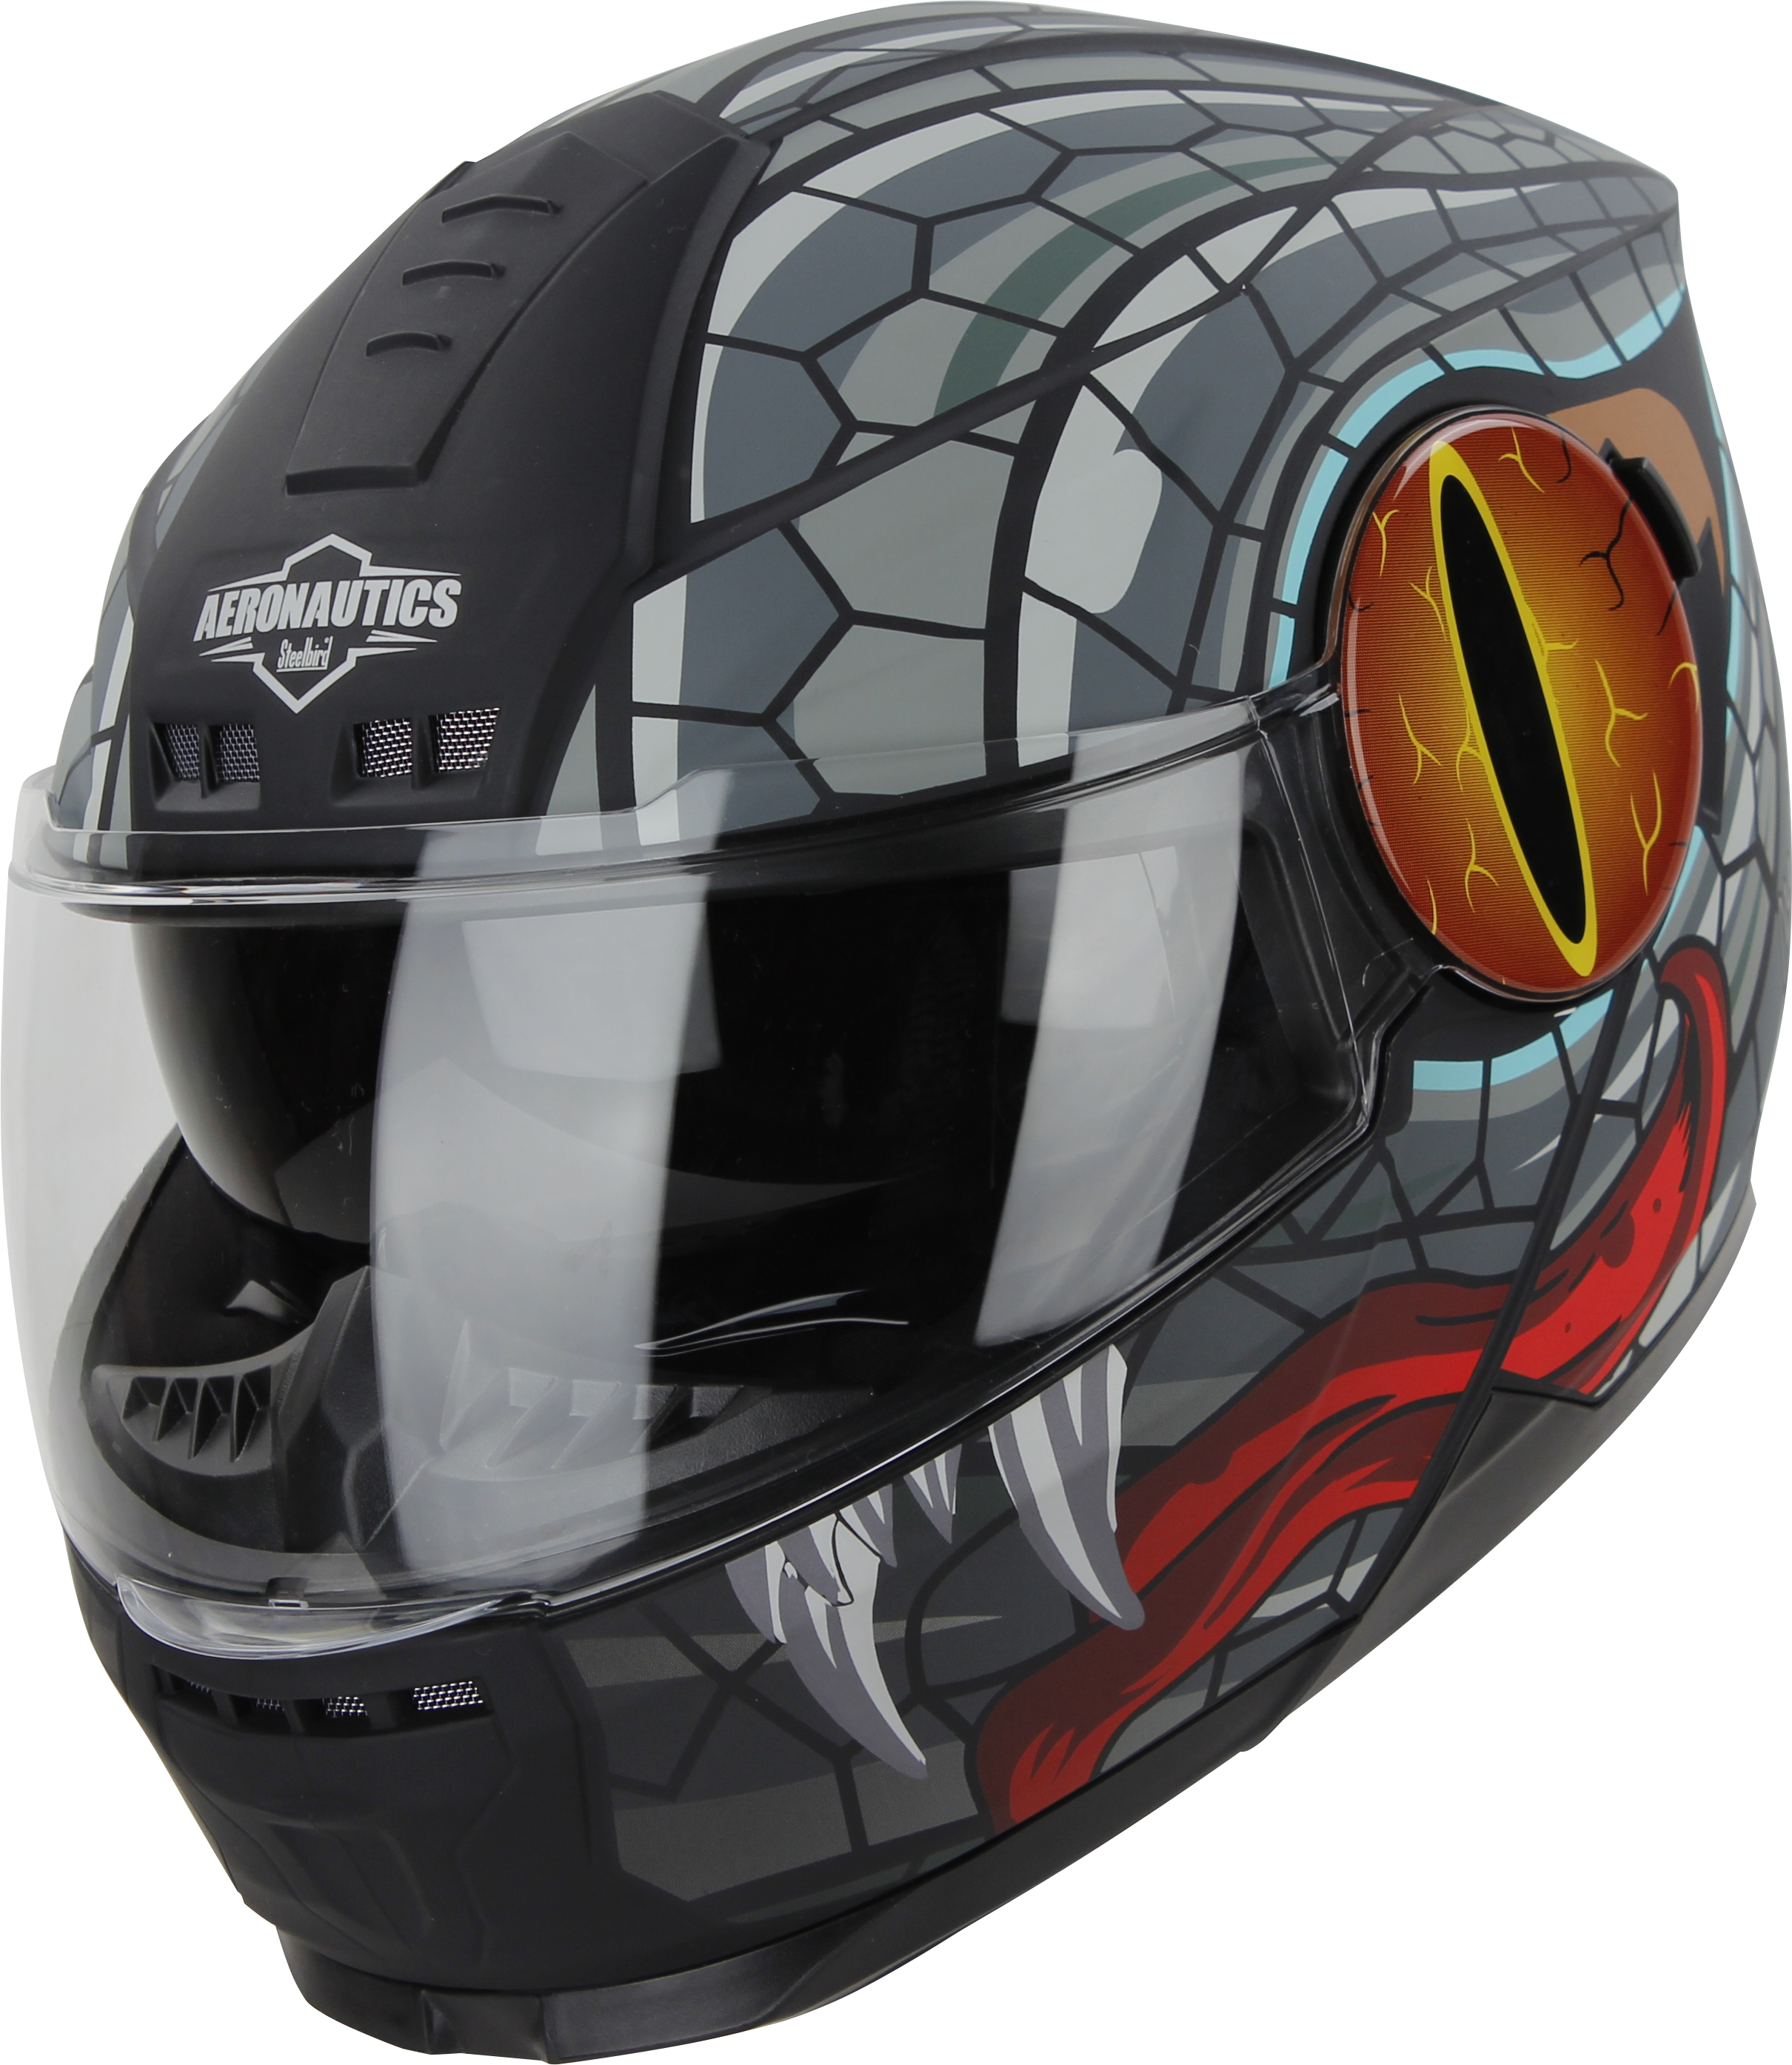 SBH-40 MAMBA MAT BLACK WITH GREY (INNER SUN SHIELD AND HIGH-END INTERIOR)